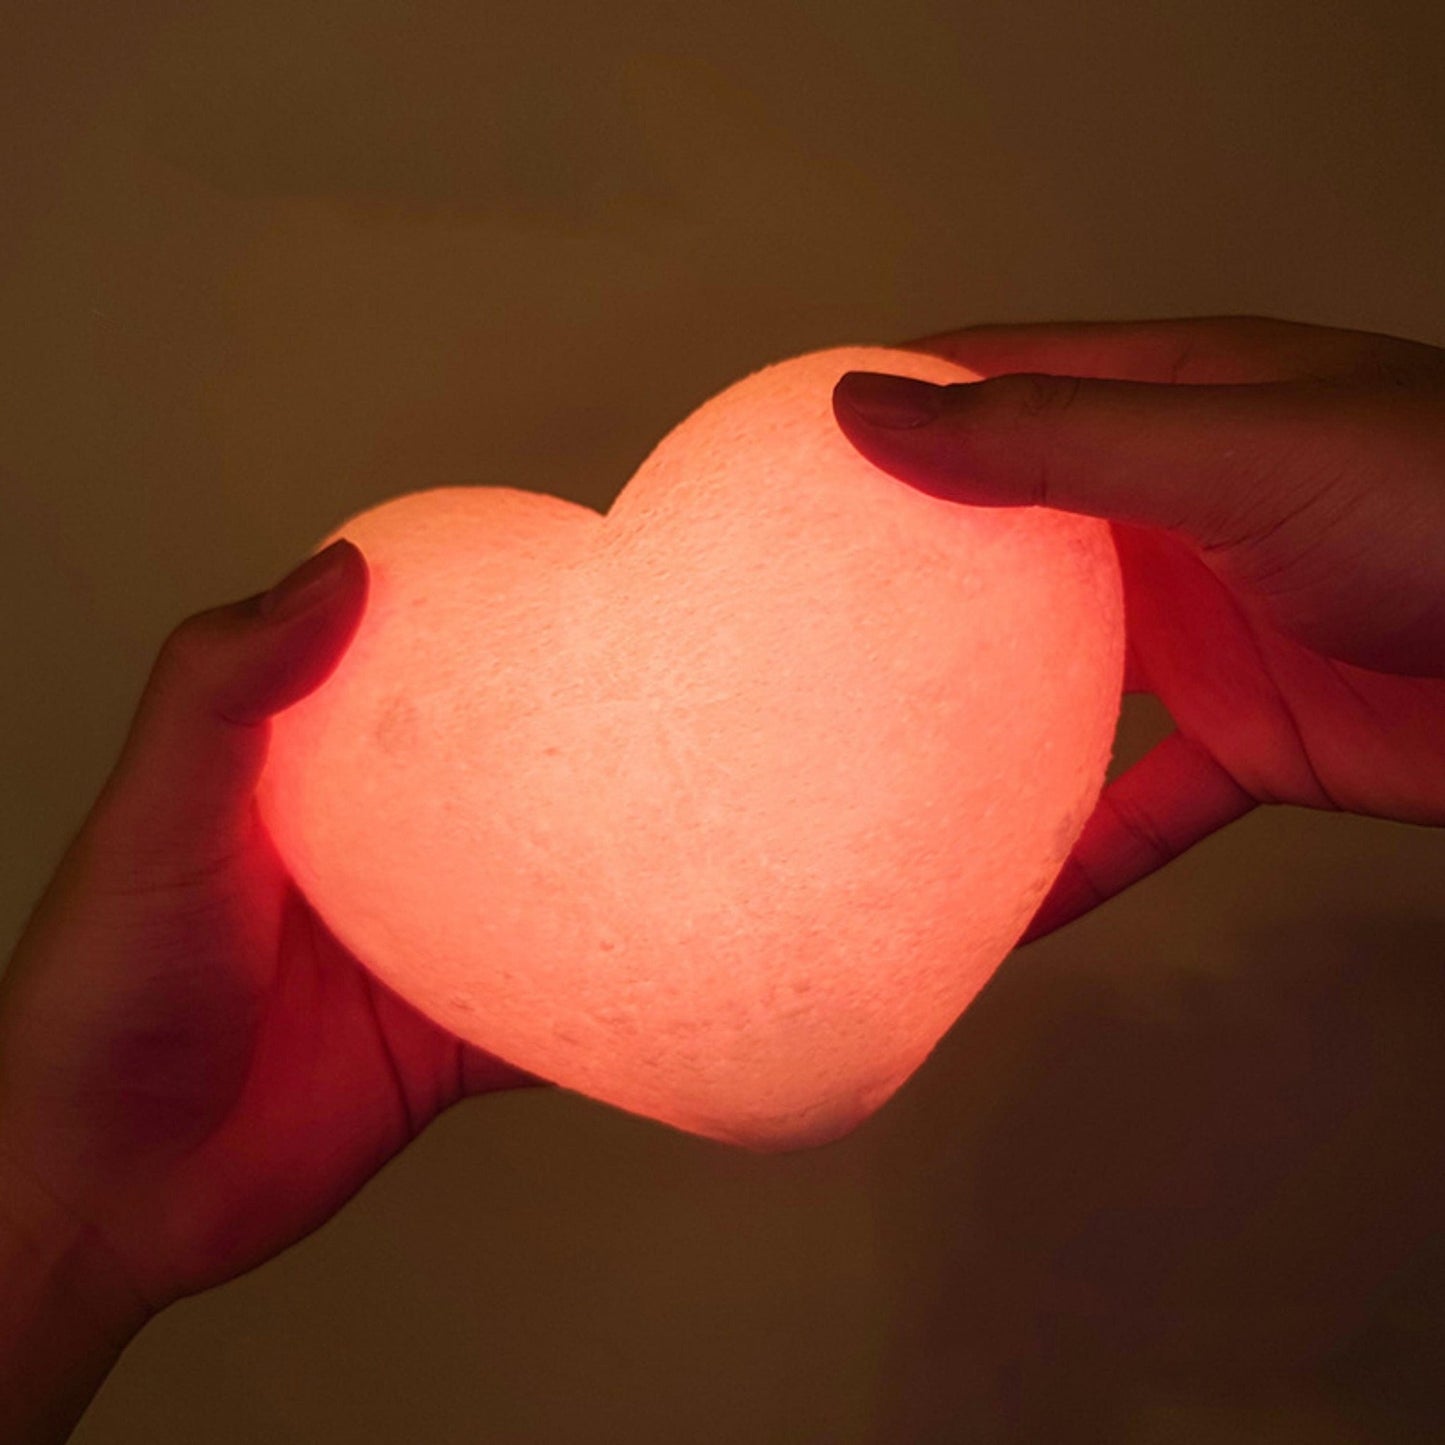 3D Printed Heart Moon Lamp - Space Mesmerise - Space Gifts | Lamps | Statues | Home Decor